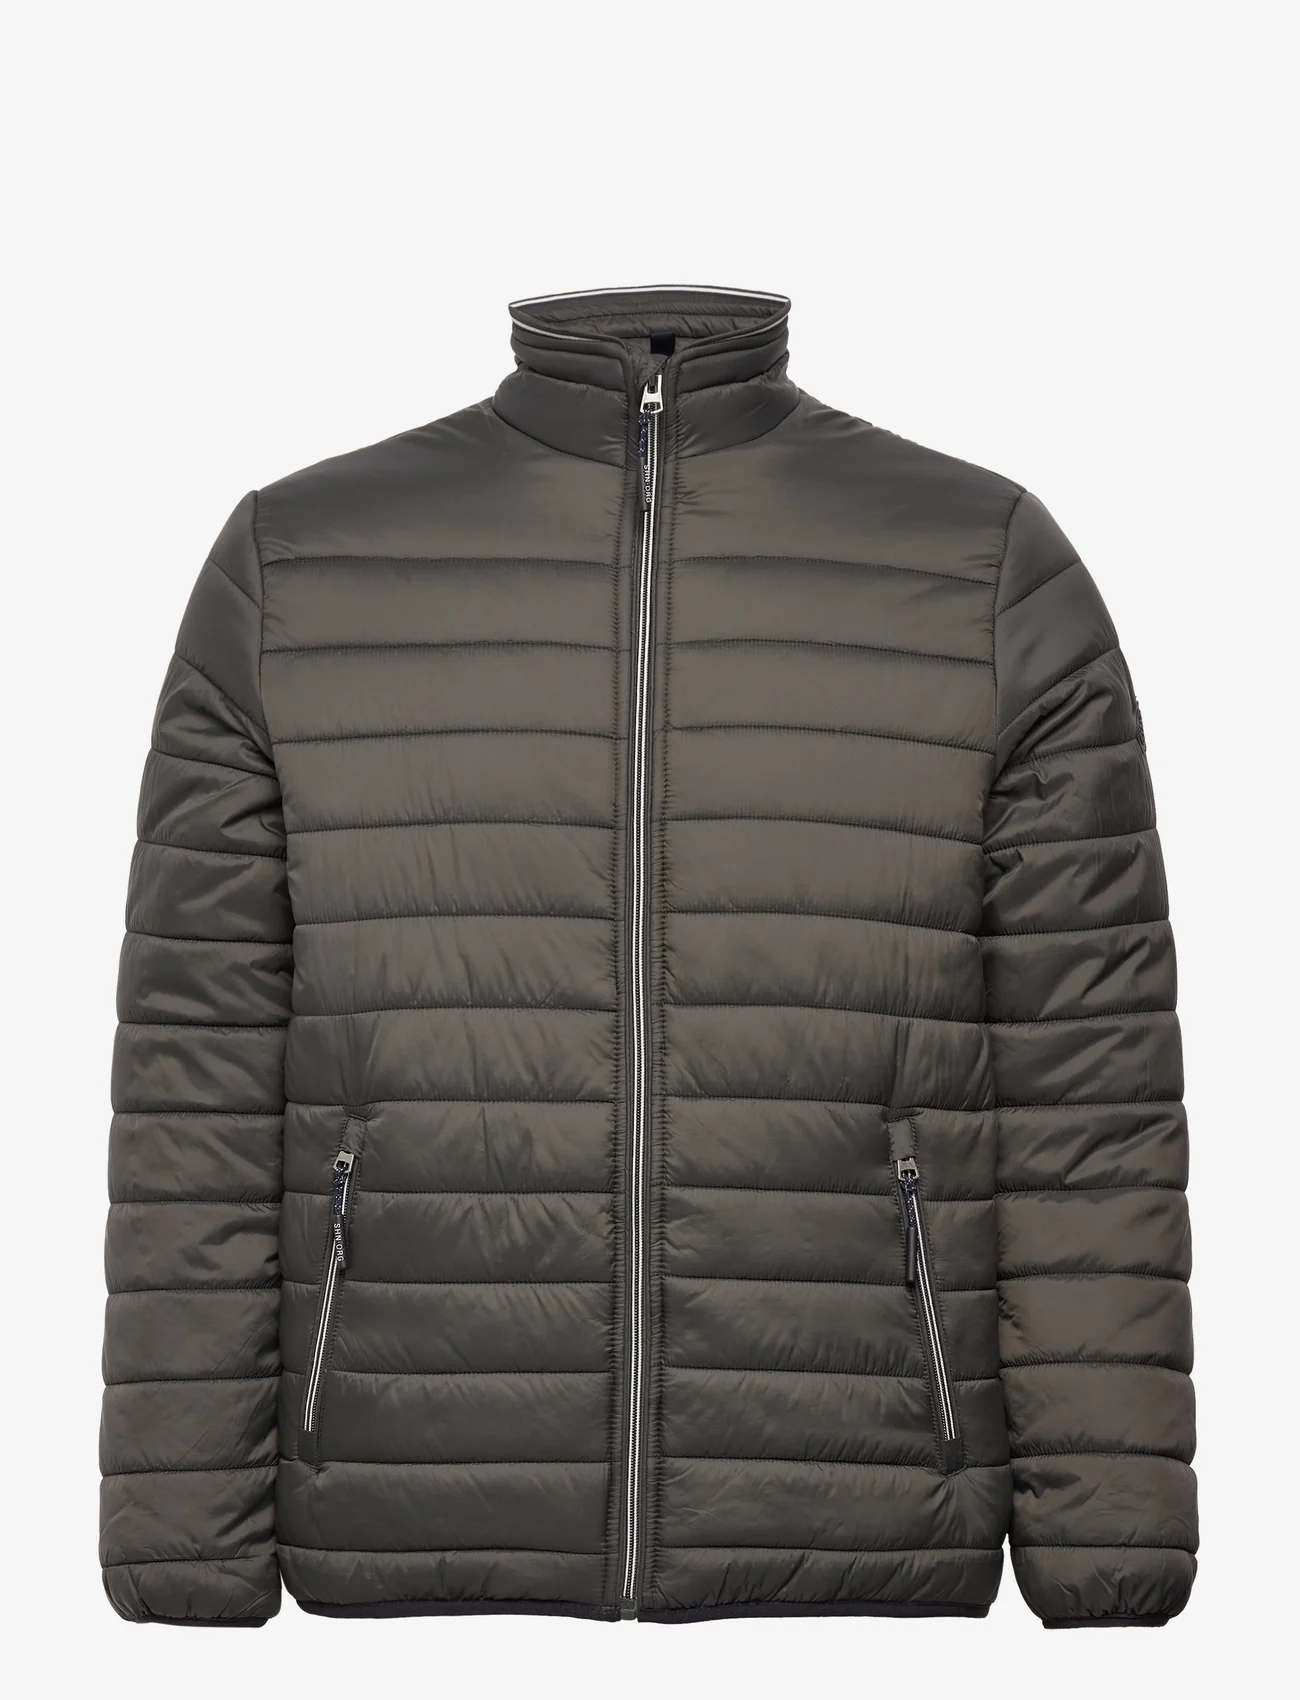 Shine Original - Light weight quilted jacket - winter jackets - dk army - 0